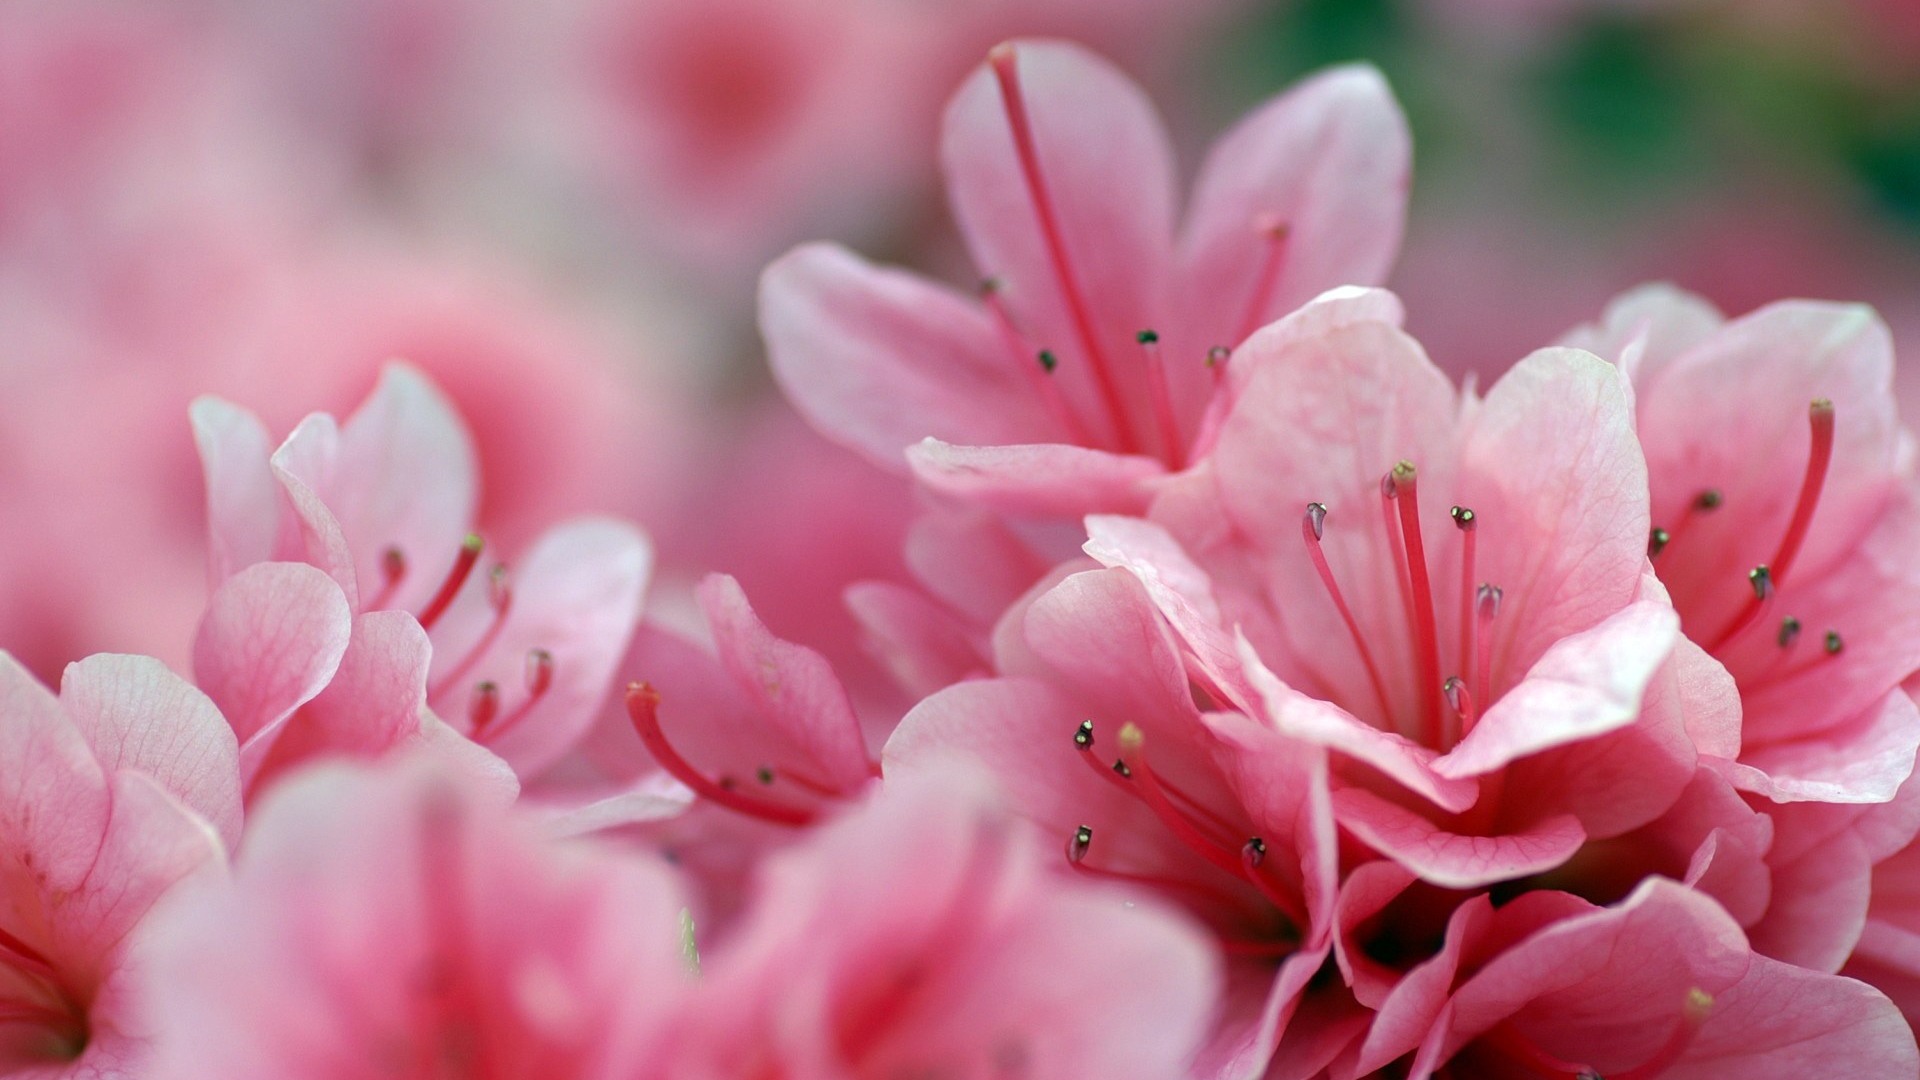 Personal Flowers HD Wallpapers #45 - 1920x1080